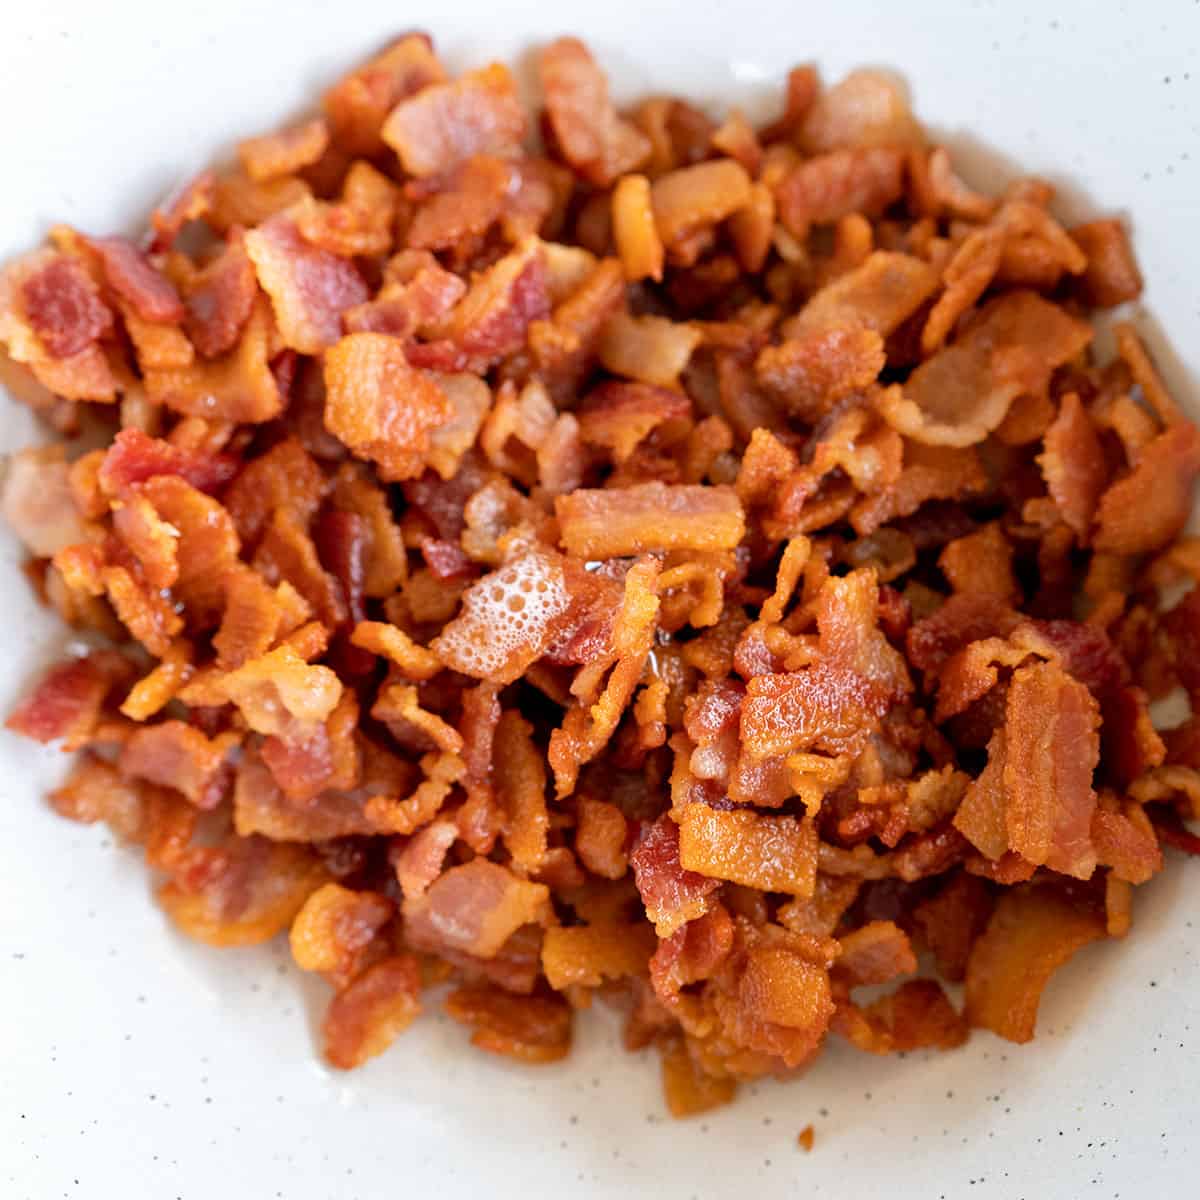 cooked crumbled bacon in a bowl.